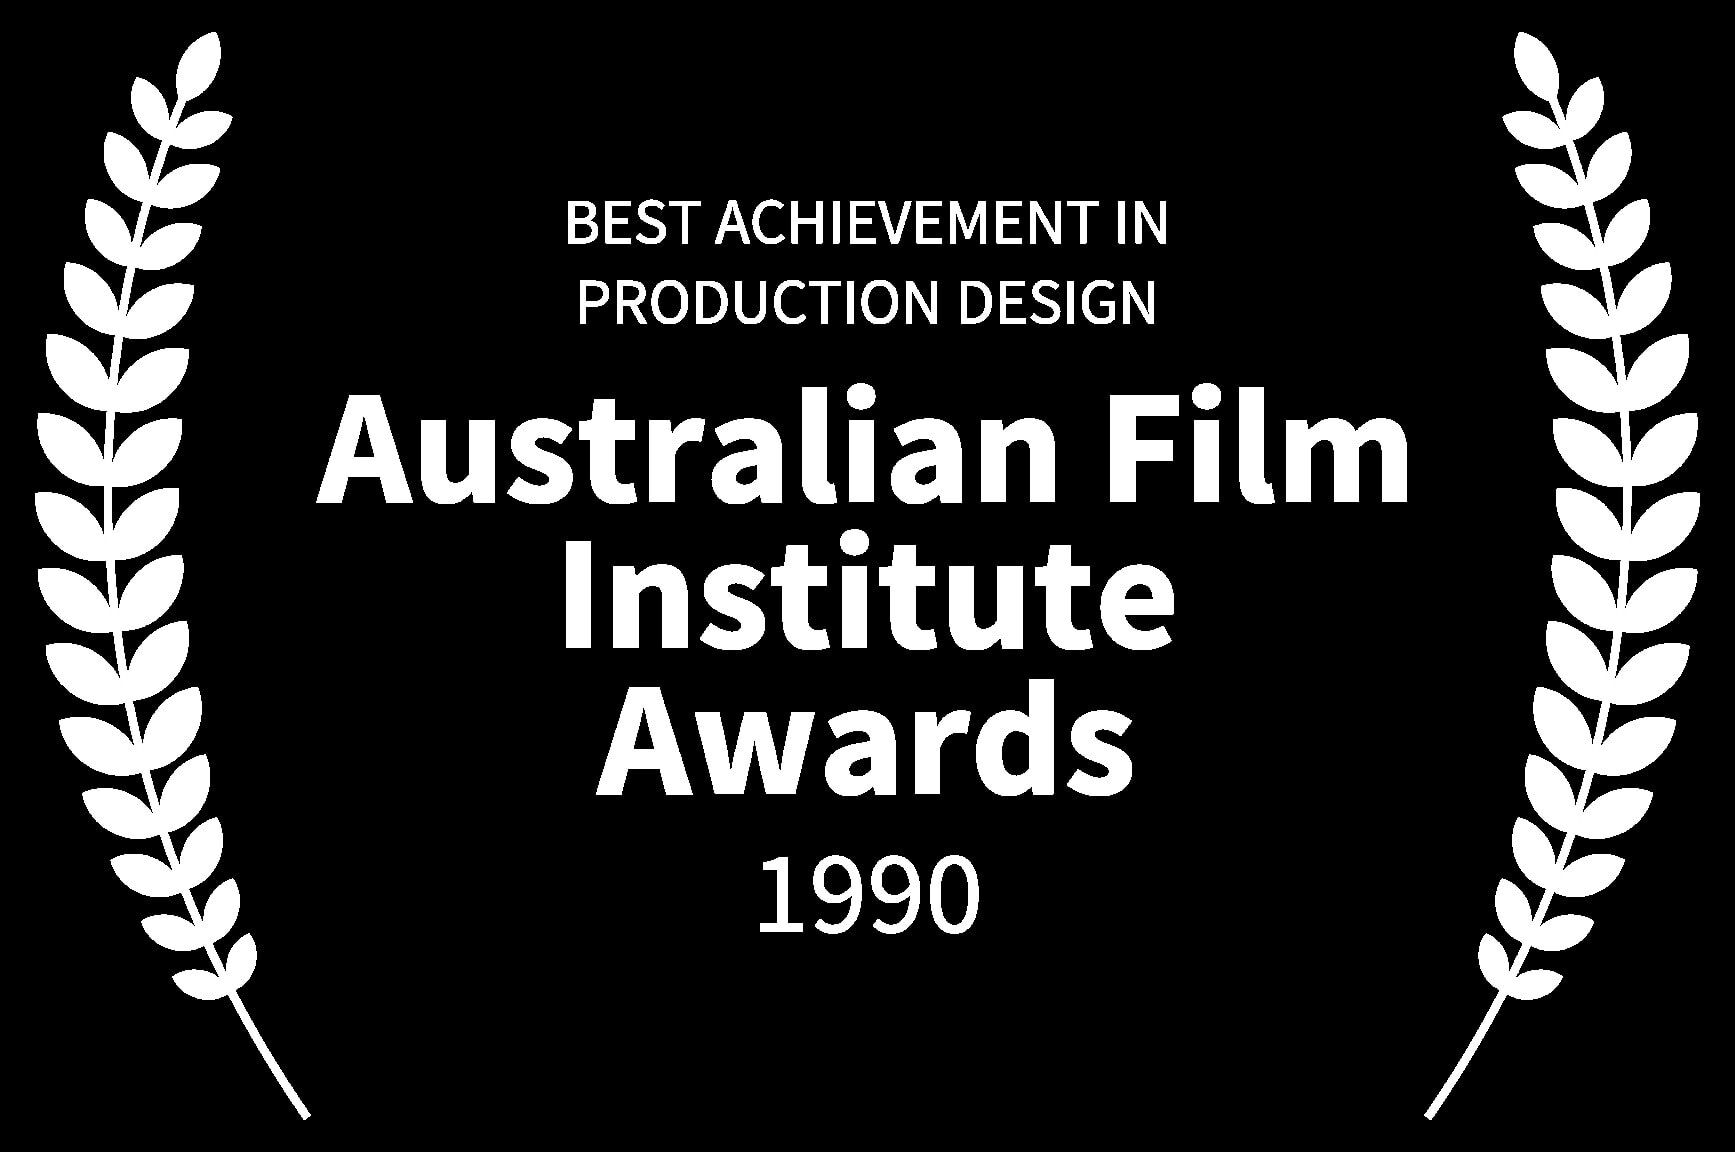 BEST ACHIEVEMENT IN PRODUCTION DESIGN - Australian Film Institute Awards - 1990 - TWO BROTHERS RUNNING